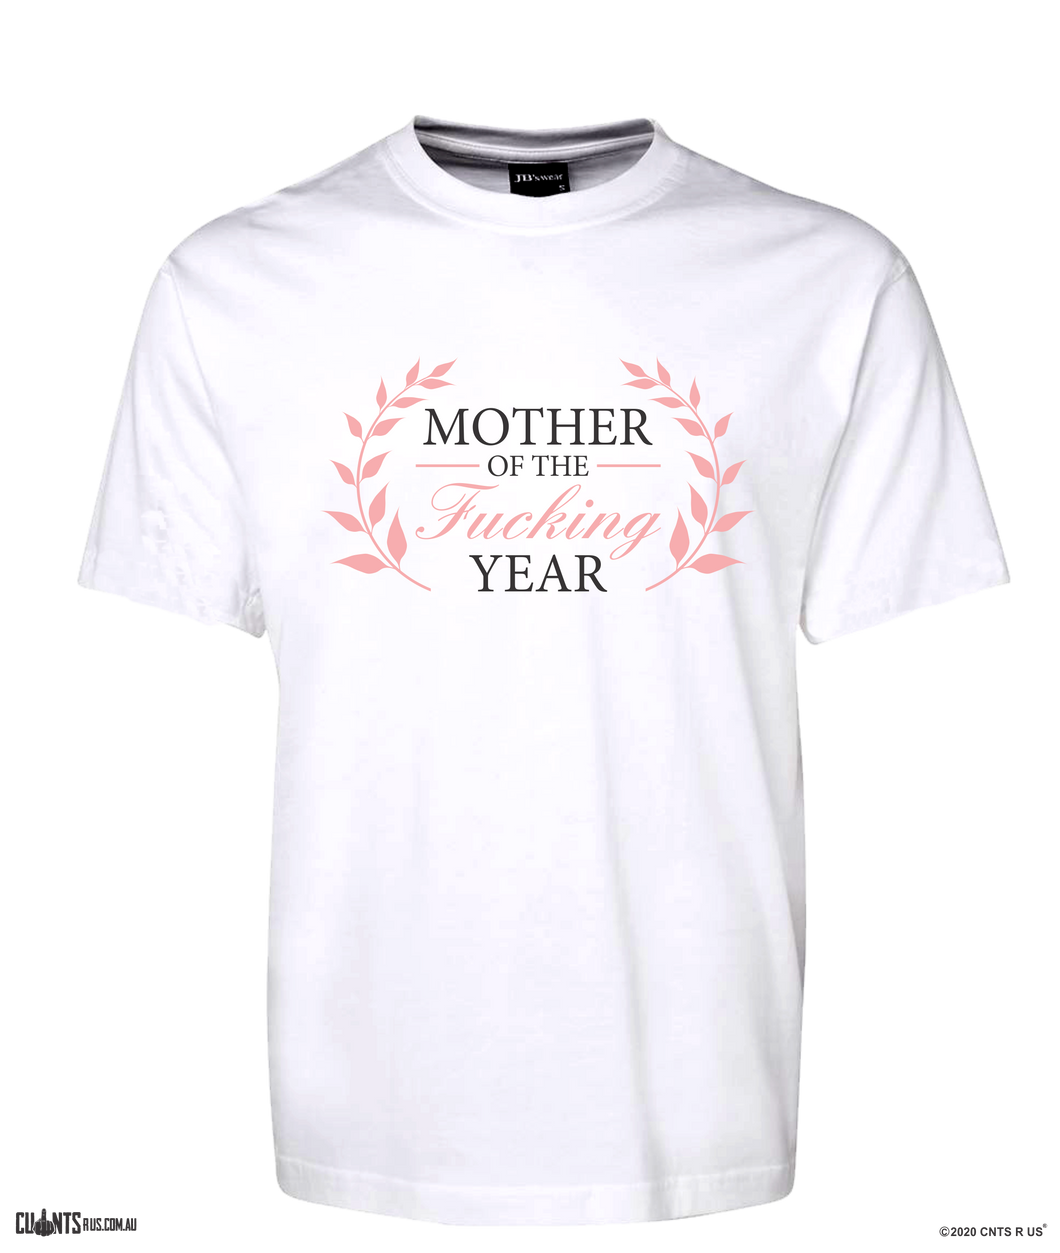 Mother Of The Fucking Year T-Shirt Mother's Day Tee CRU01-1HT-24008